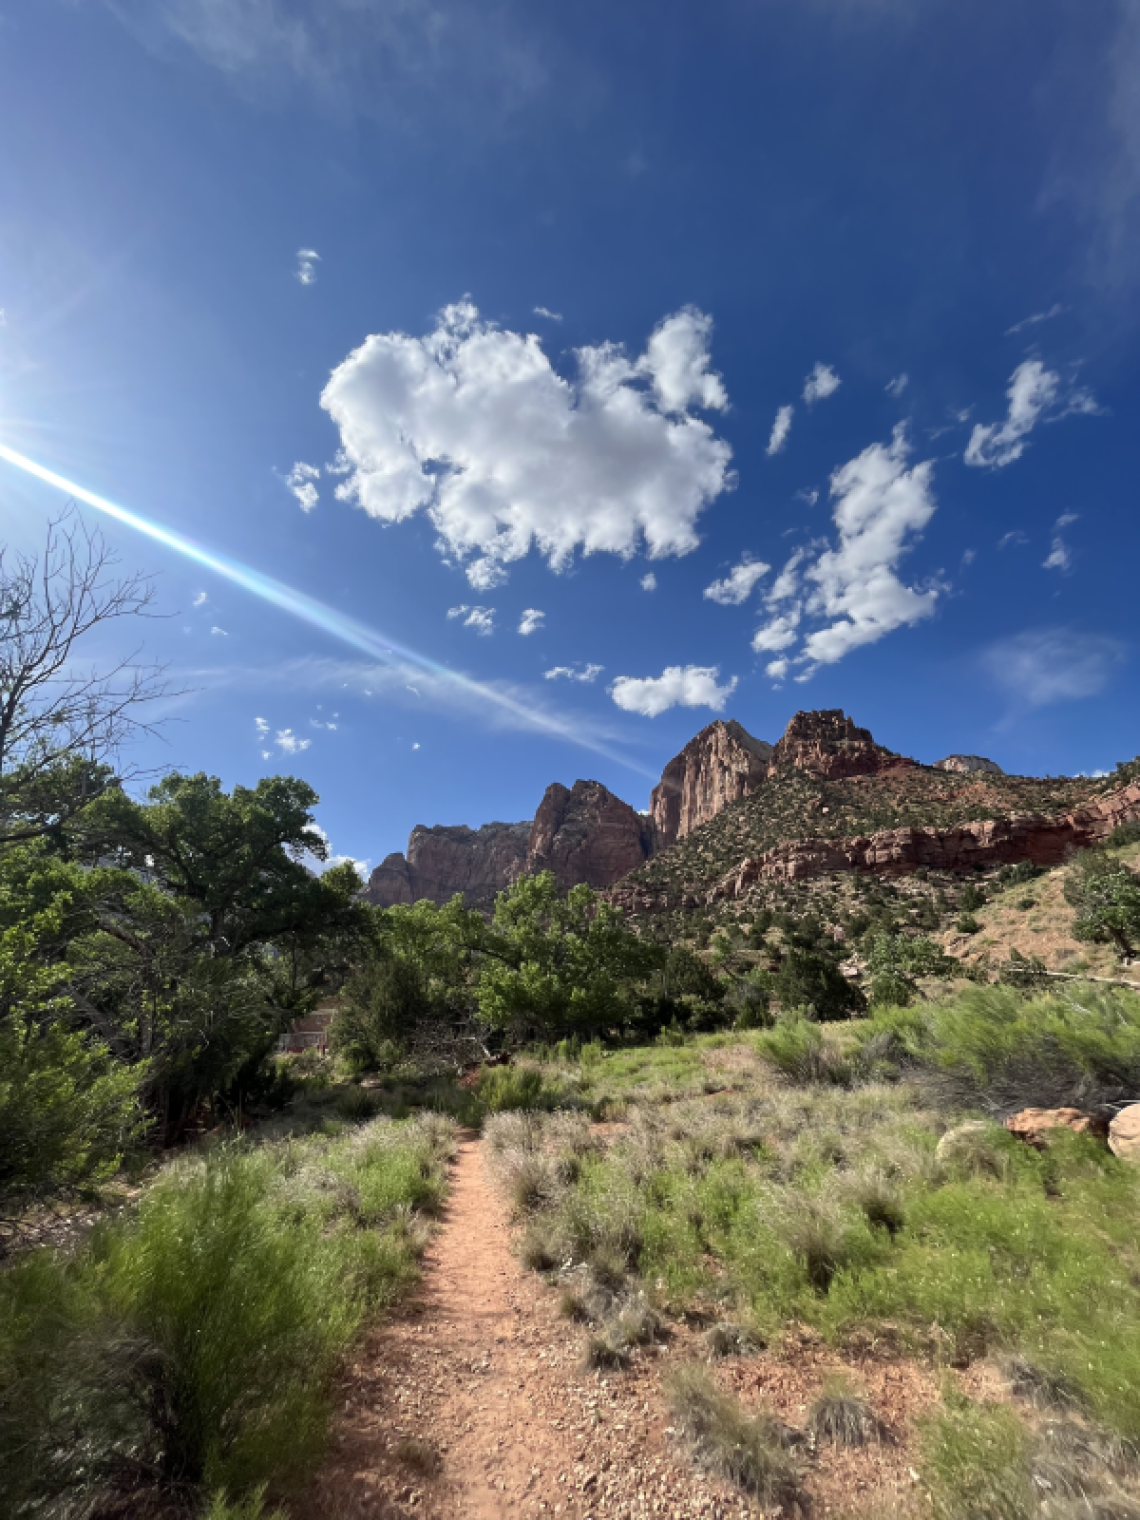 Small clouds in a beautiful blue sky over. a trail path in Zion National Park.